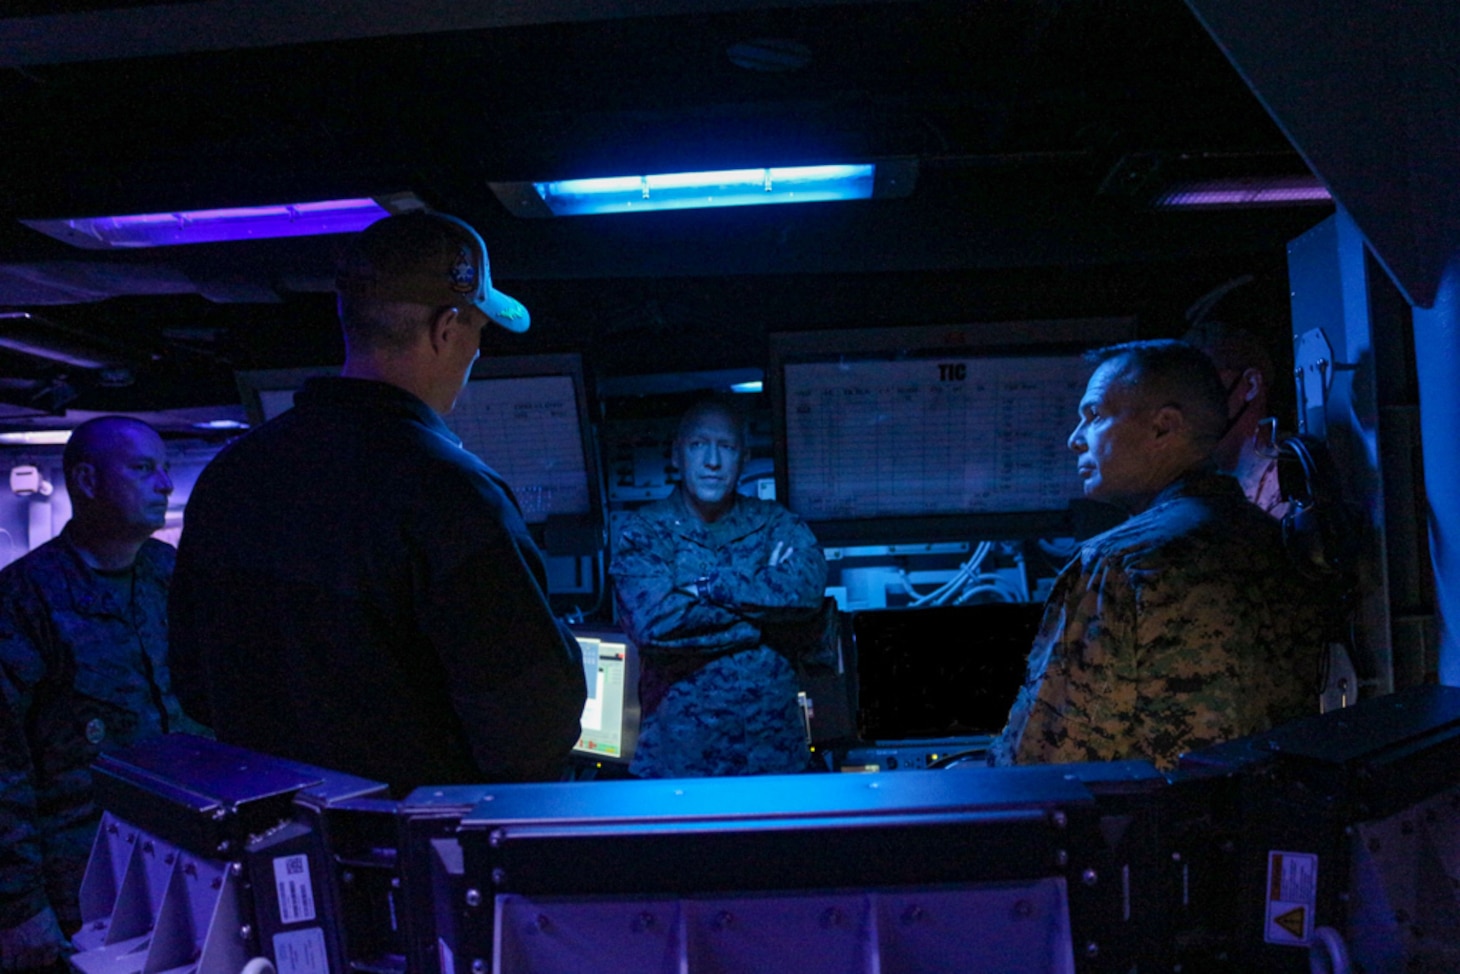 Maj. Gen. Jay Bargeron (right), commanding general, 3d Marine Division, tours the Combat Information Center of guided-missile destroyer USS Ralph Johnson (DDG 114) with the ship’s commanding officer Cmdr. Colin Roberts (left). Ralph Johnson is supporting U.S. Marines and members of the Japan Ground Self-Defense Force (JGSDF) as part of Resolute Dragon, an exercise designed to strengthen the defensive capabilities of the U.S.-Japan Alliance by refining procedures for bilateral command, control, and coordination in a geographically distributed environment.